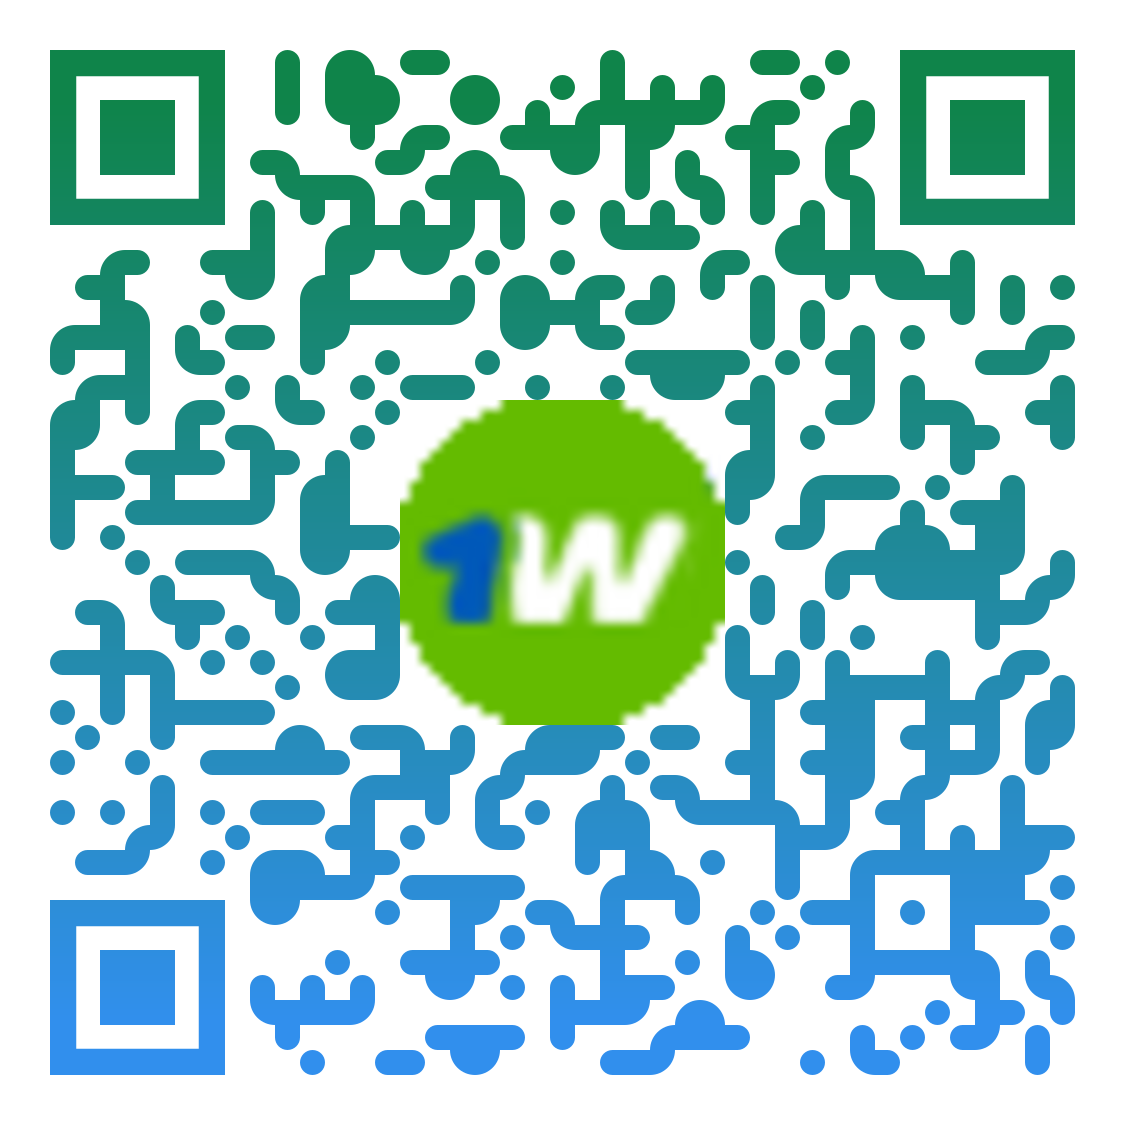 Download 1win app, scan qr code, download and start play.